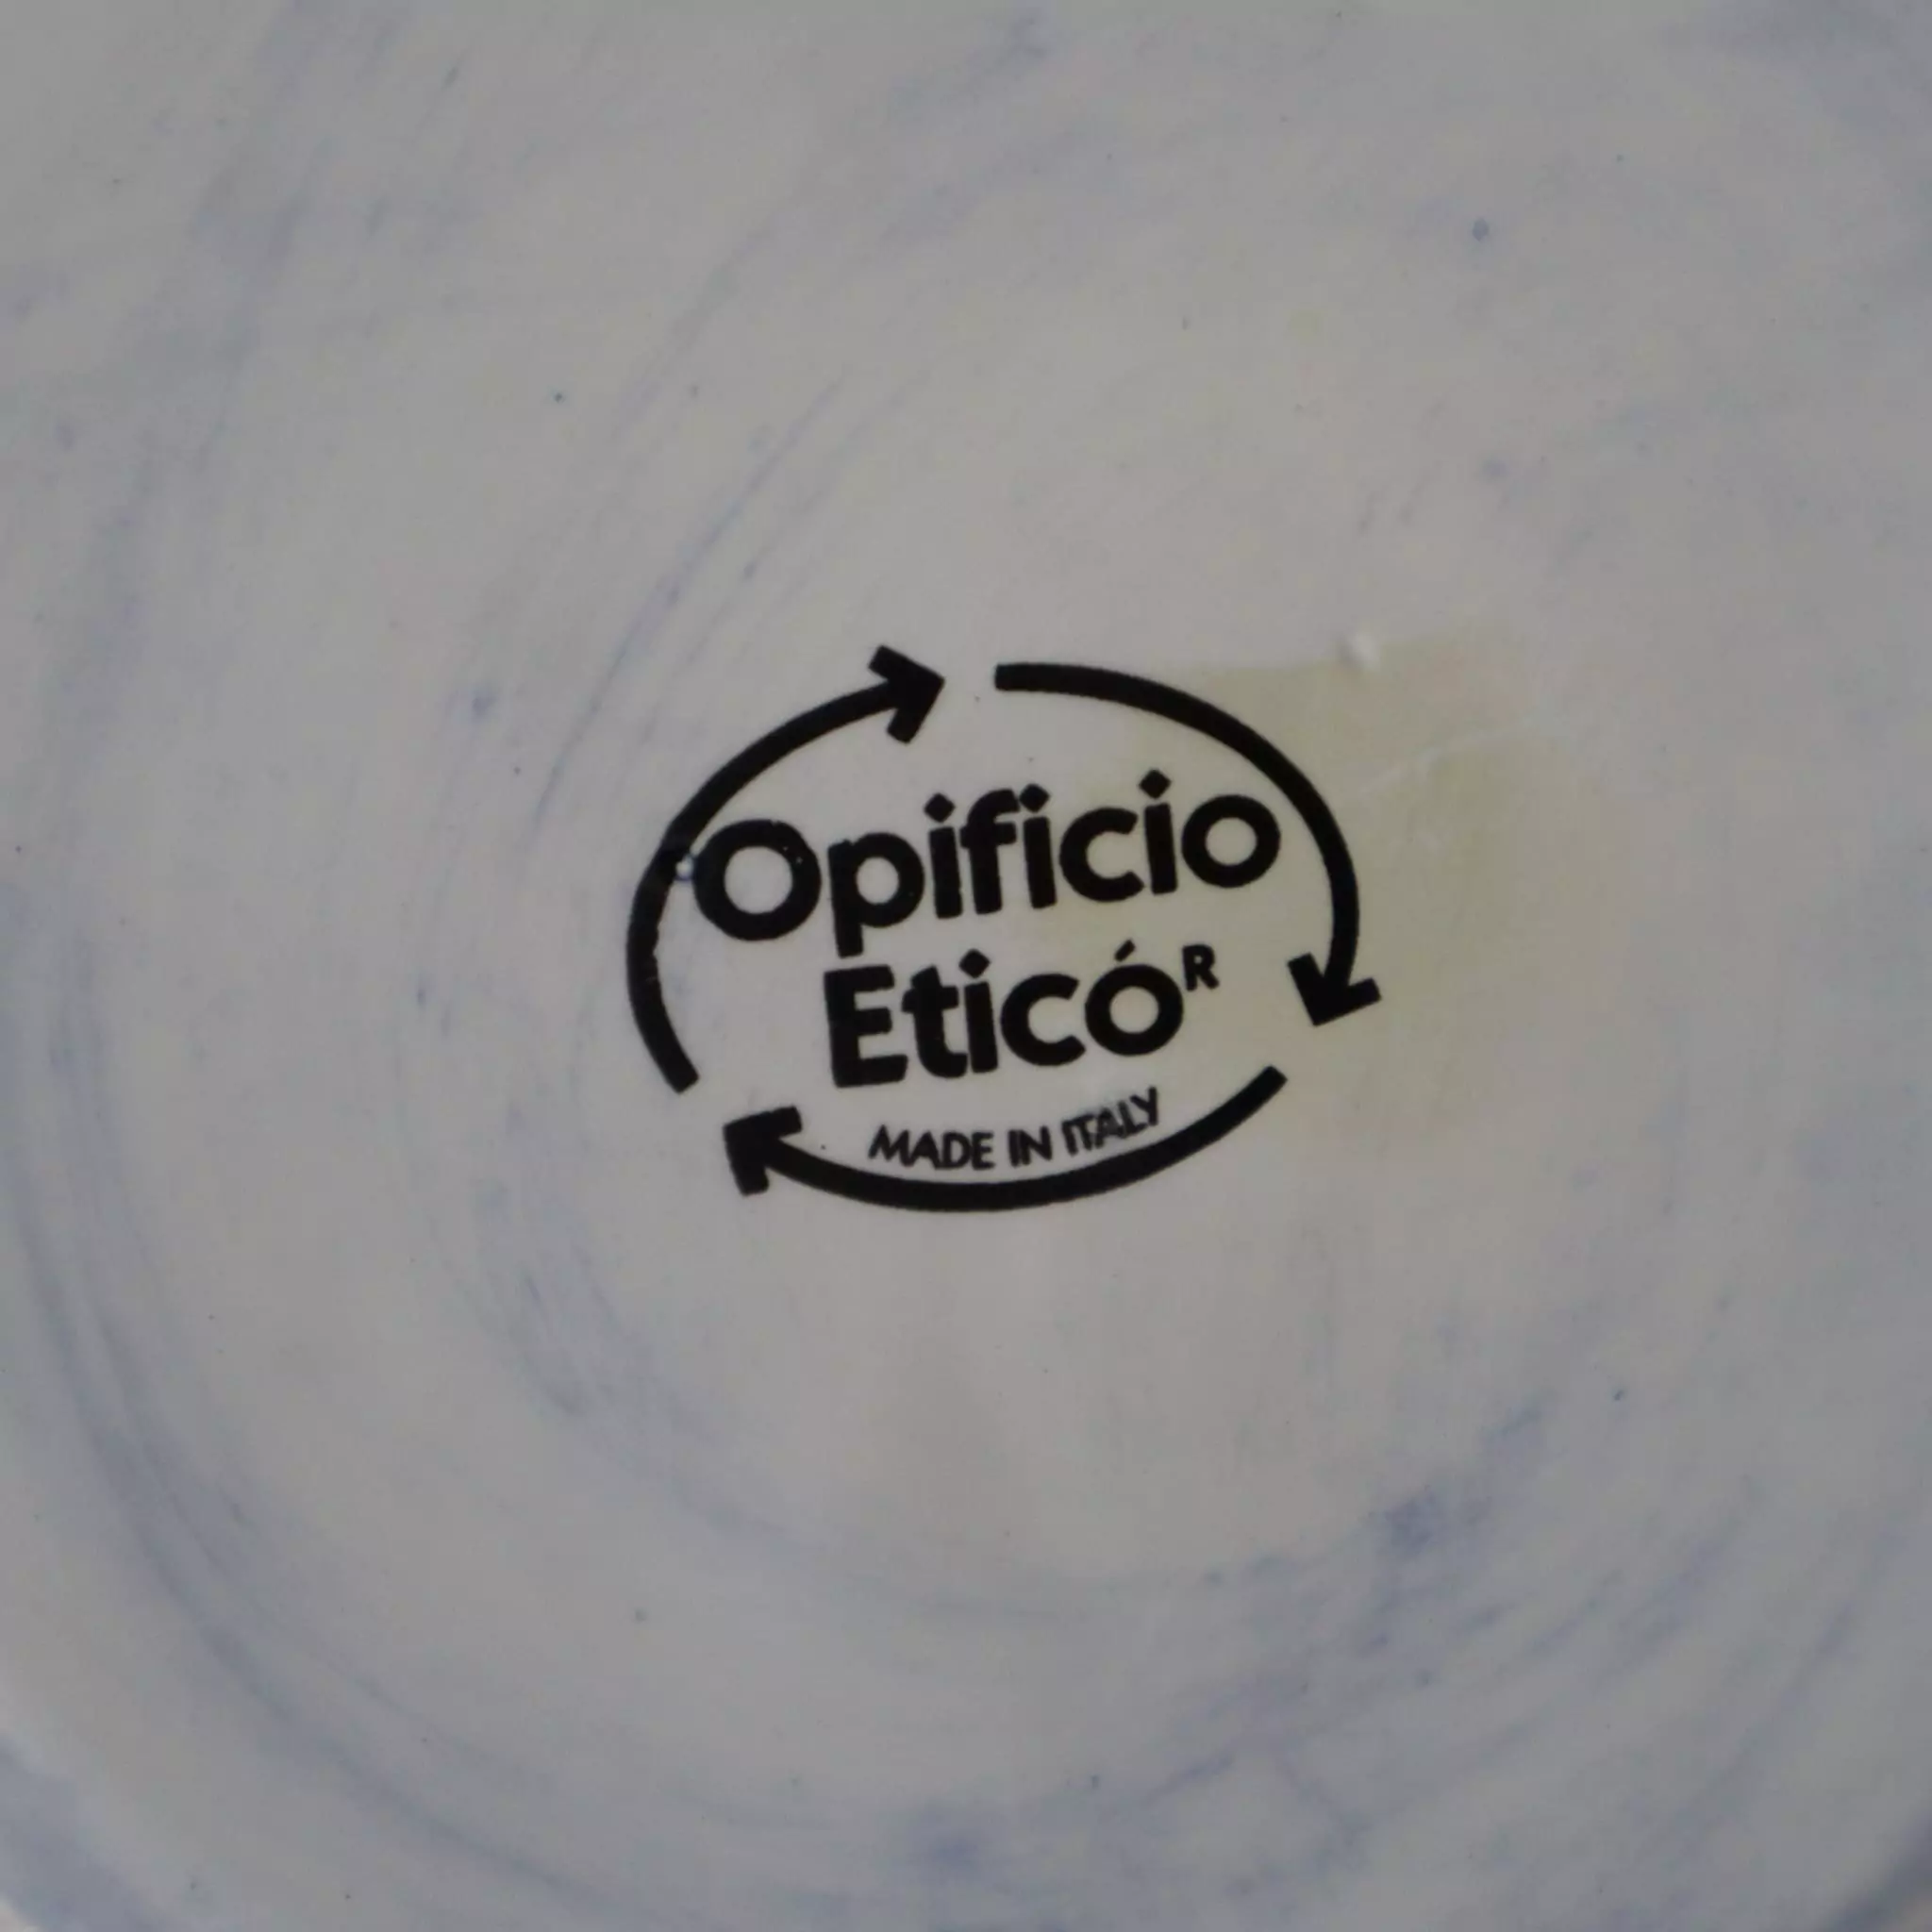 visionidepoca-porcelain-vase-ky-how-and-why-free-falling-on-the-world-by-opicifio-etico-made-in-italy-stamp-view